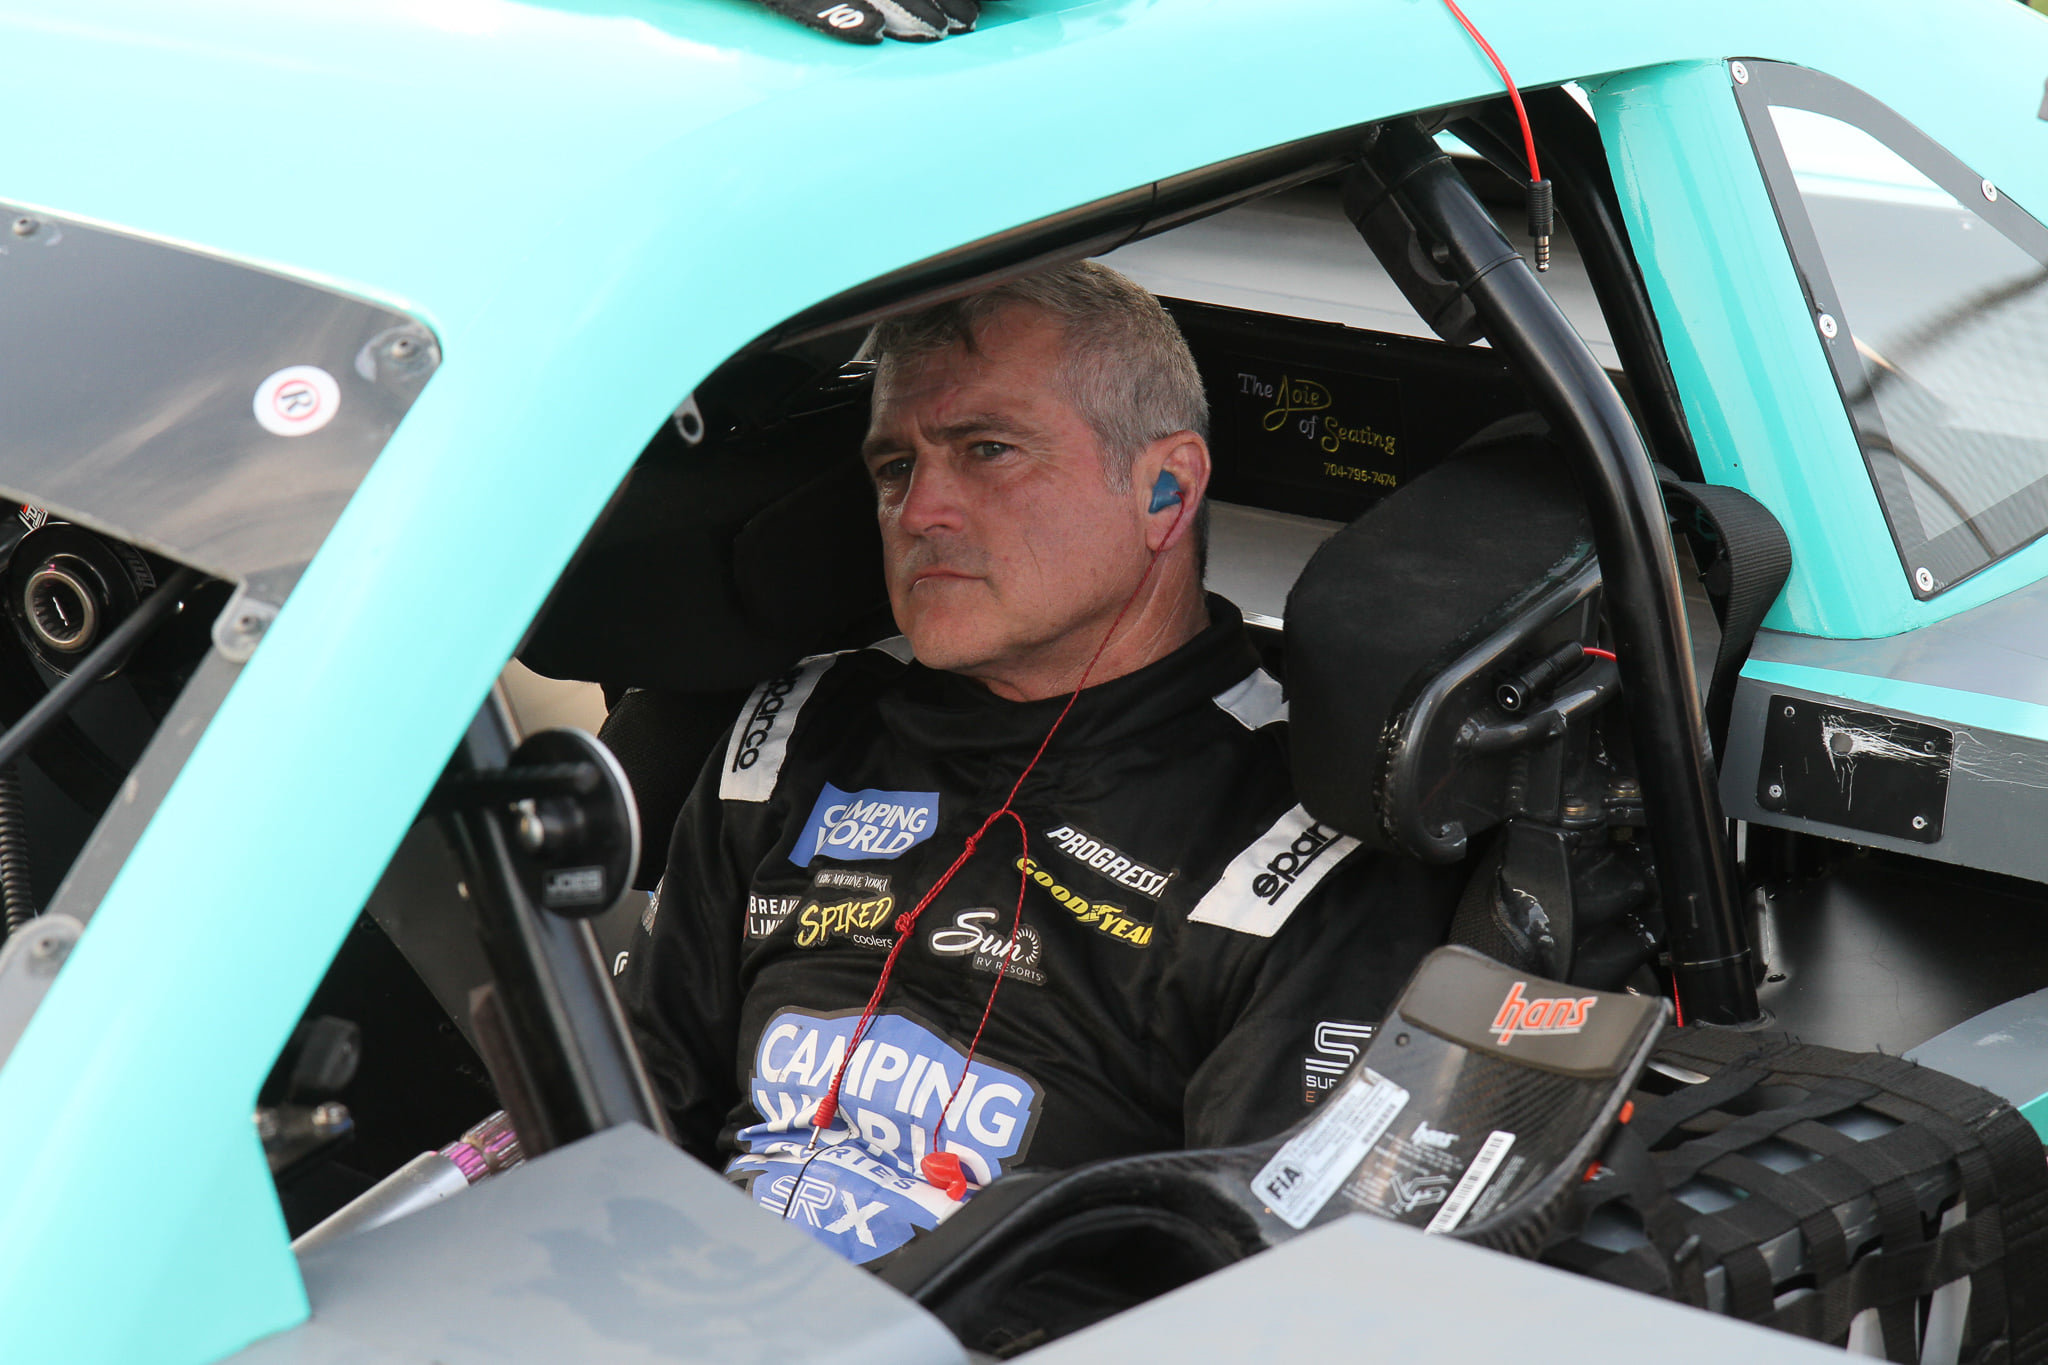 Bobby Labonte hasn't missed a beat as he demonstrated with a strong showing the SRX. (Photo: Bobby Labonte | Facebook)